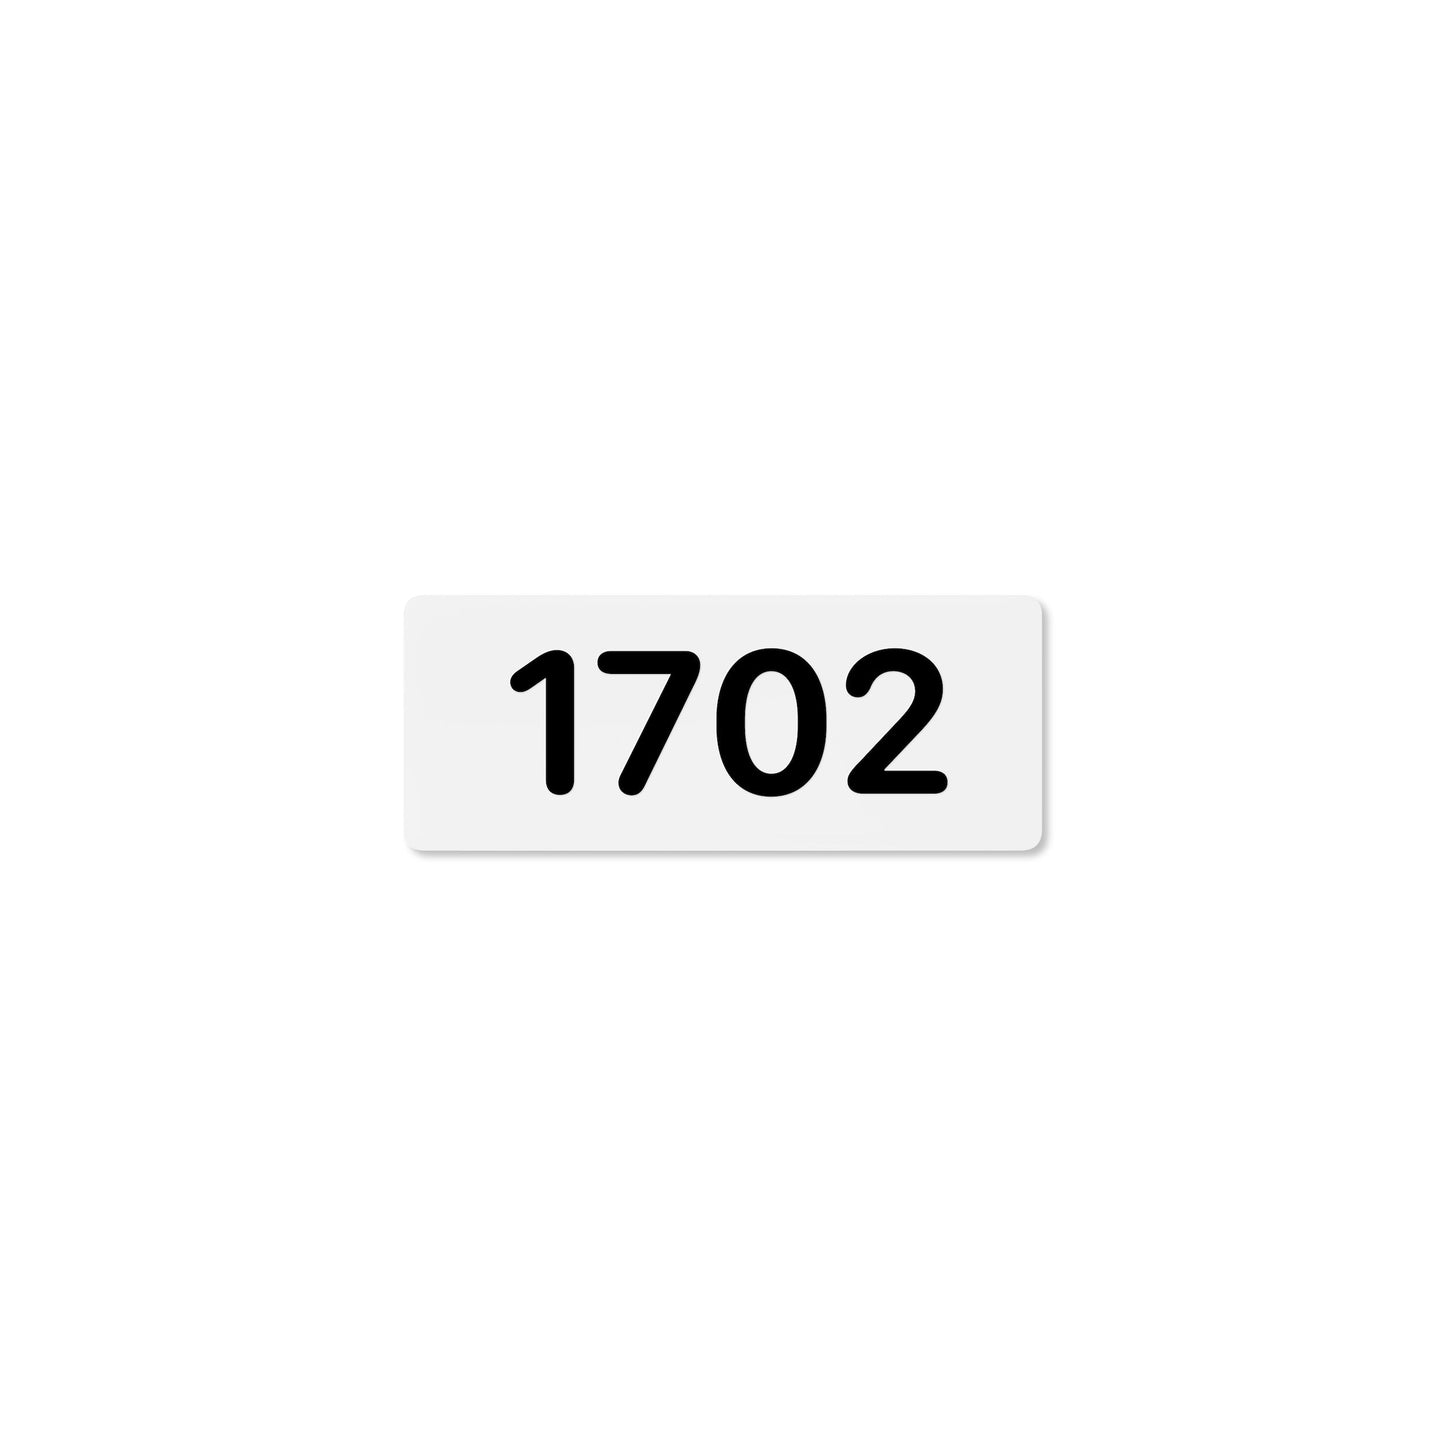 Numeral 1702